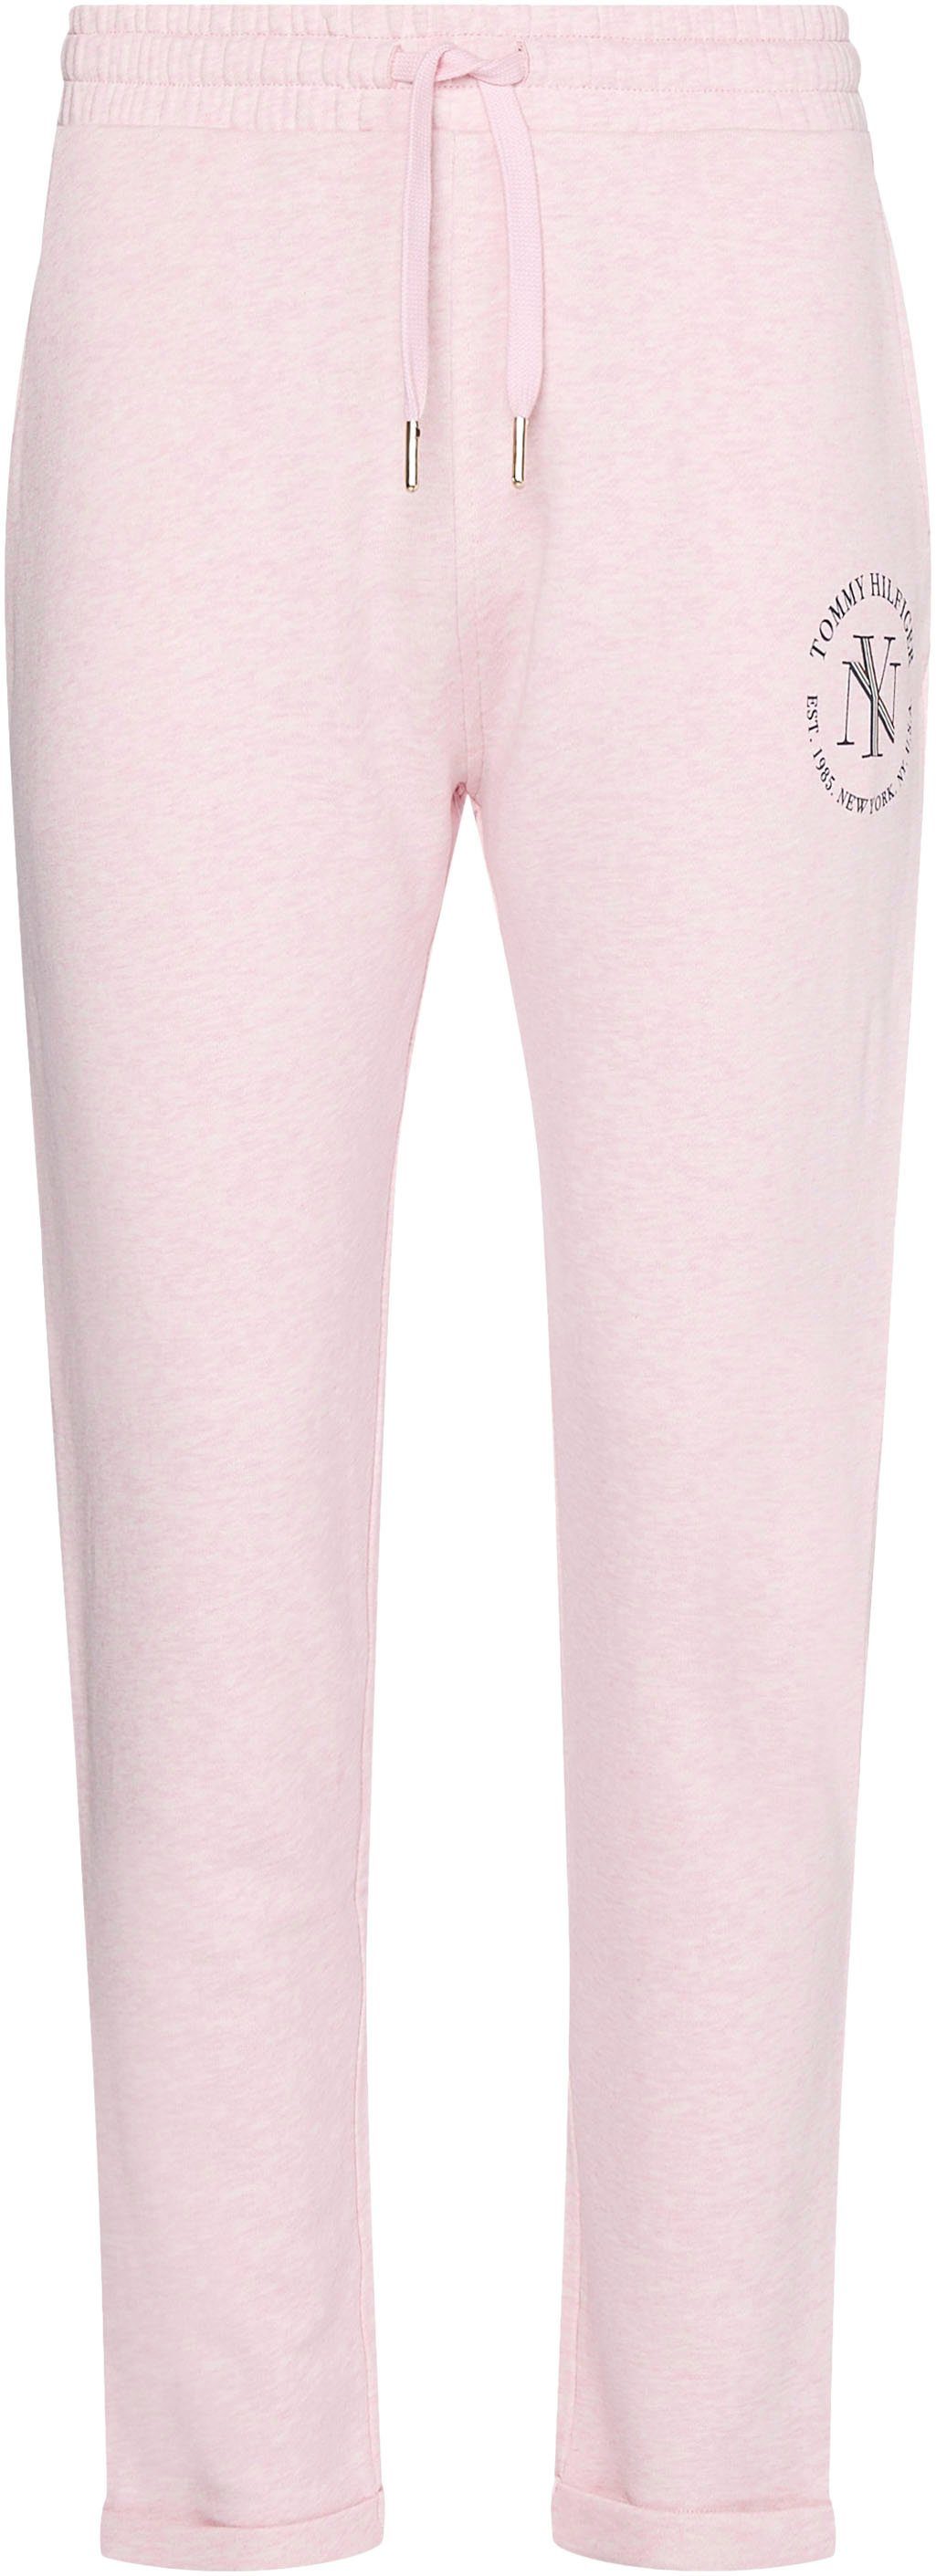 Tommy Hilfiger Sweatpants TAPERED ROUNDALL SWEATPANTS Hilfiger mit Tommy Markenlabel Classic-Pink-Heather NYC